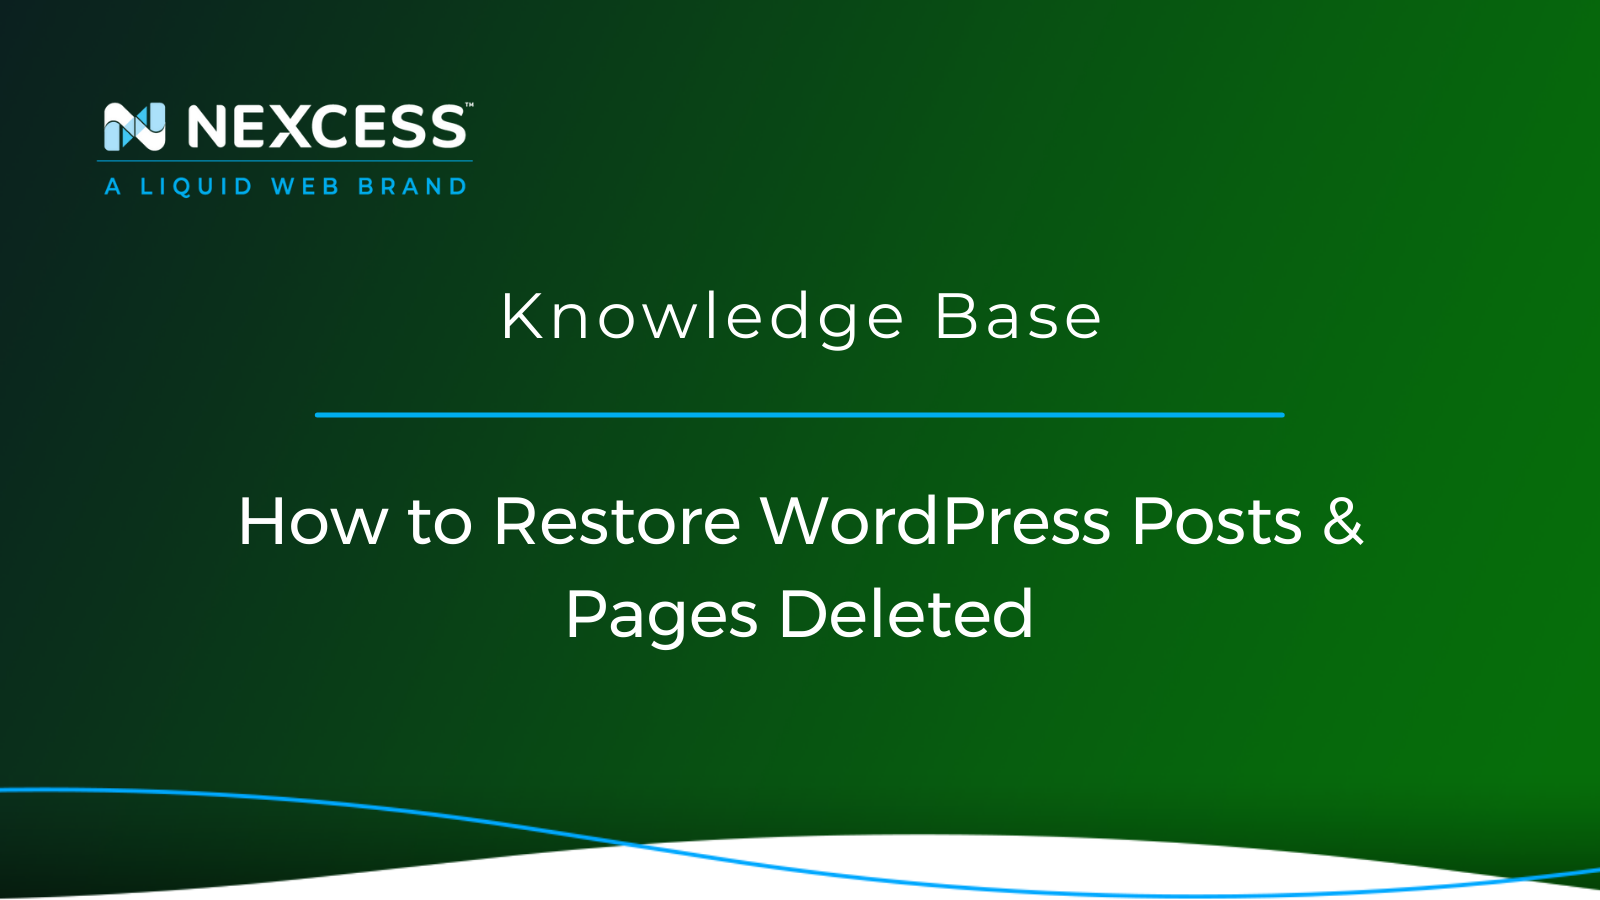 How to Restore WordPress Posts & Pages Deleted